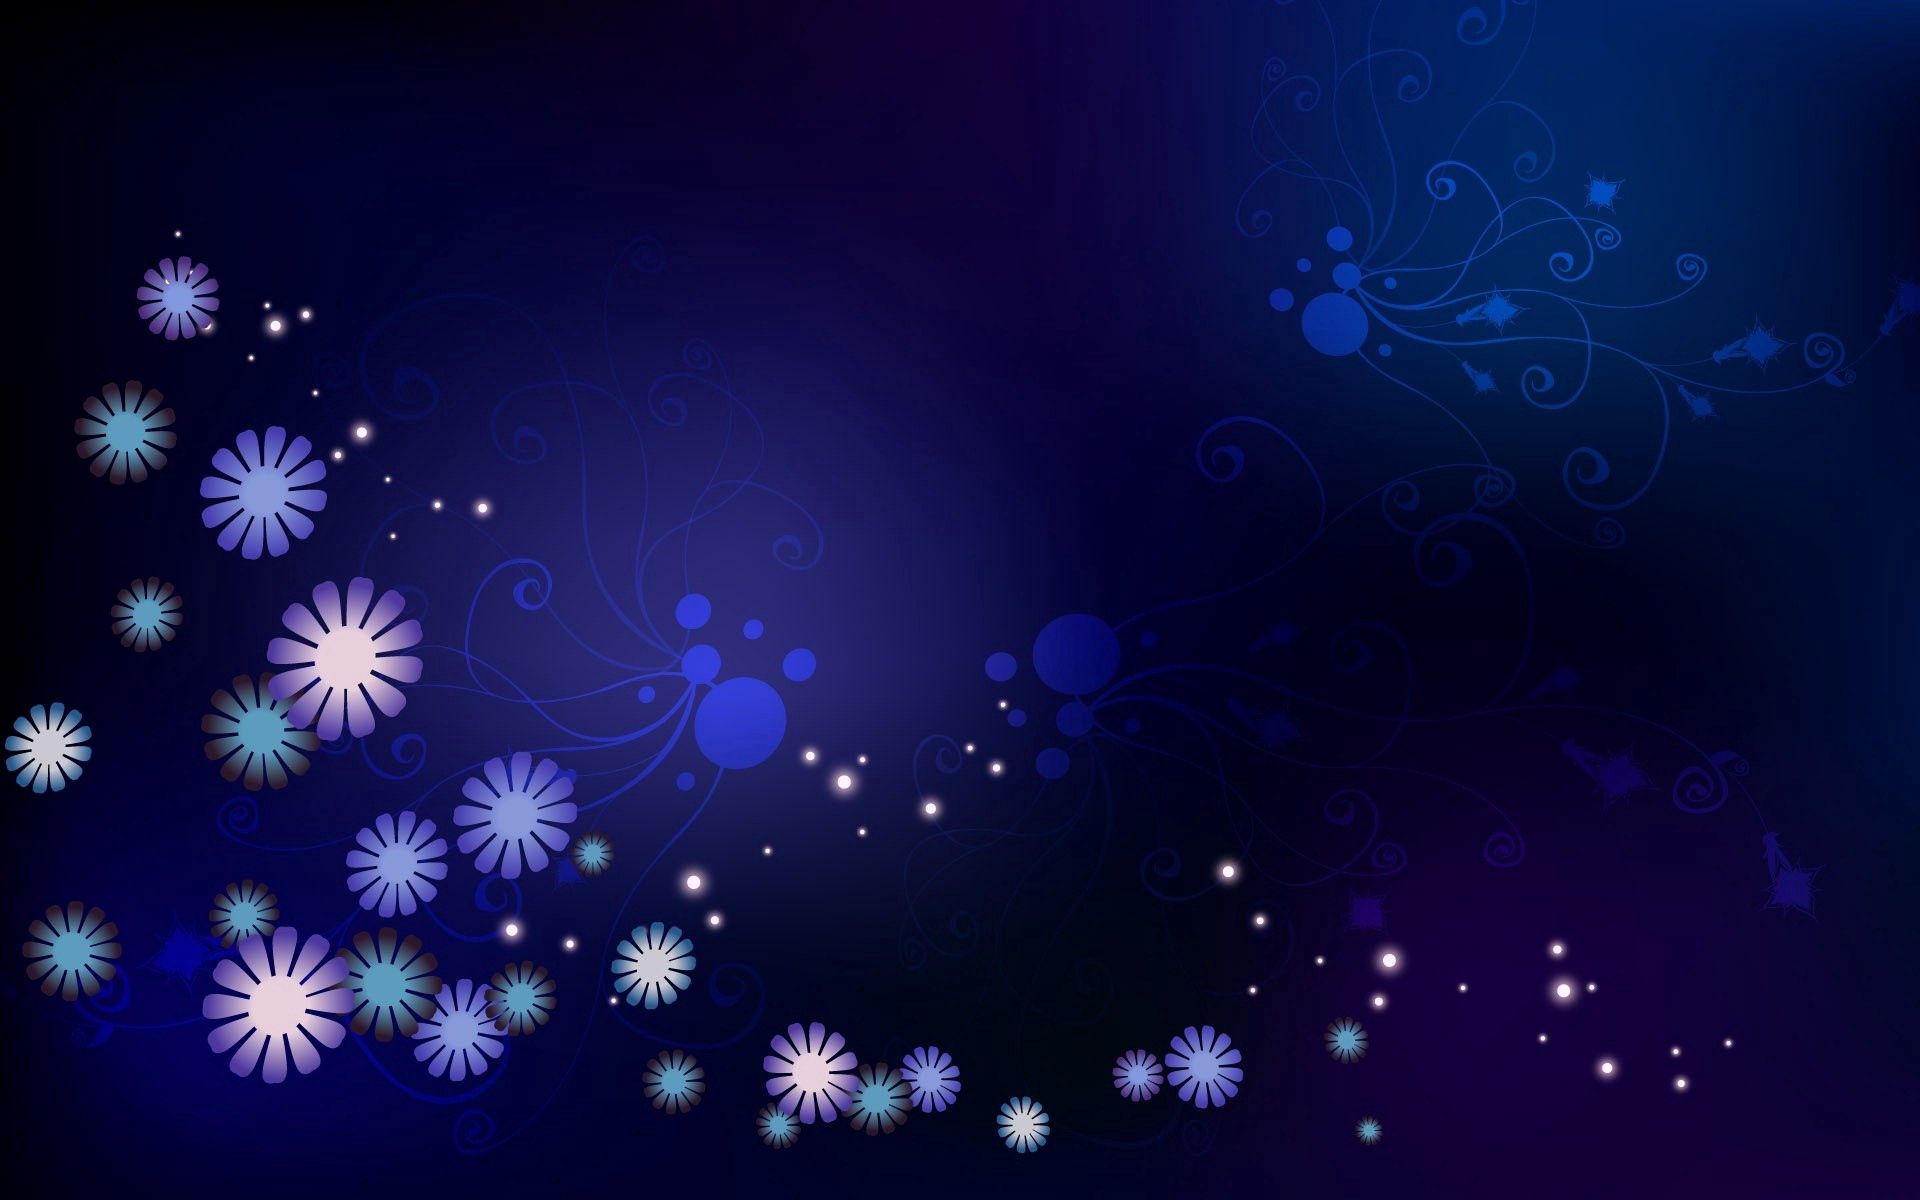 point, color, flowers, points, abstract, background, stars, circles, shine, light